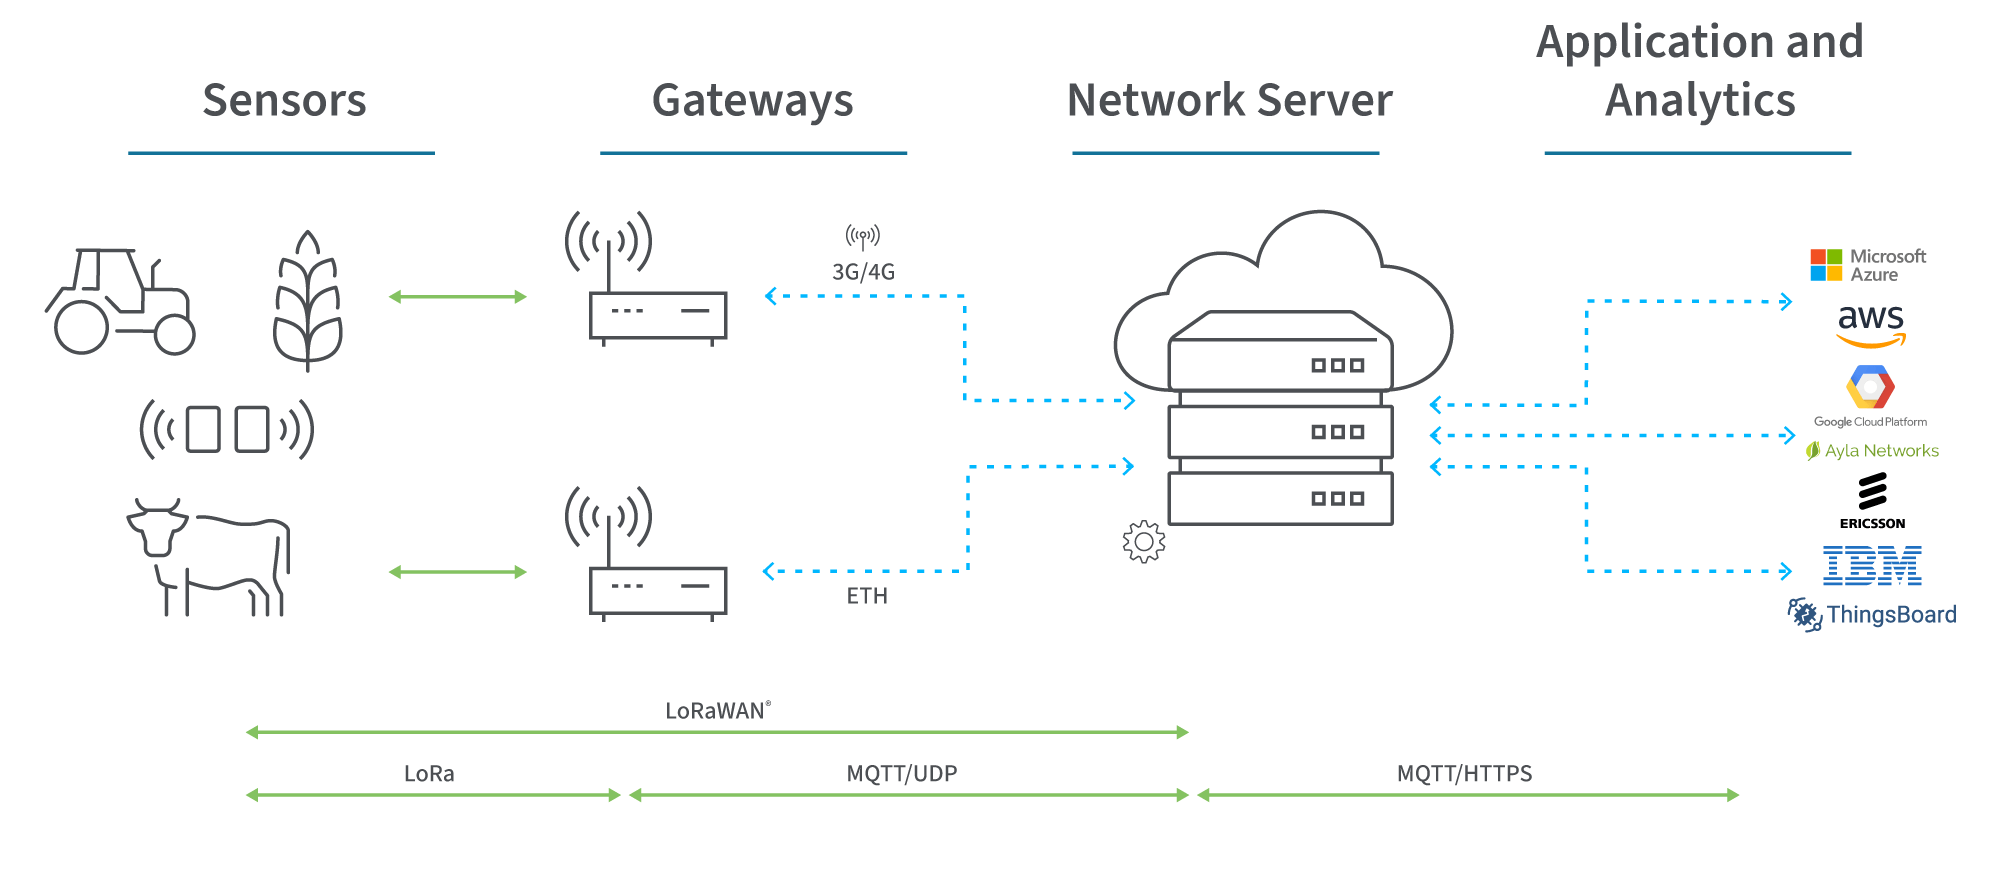 A visual summary or illustration LoRa and LoRaWAN works